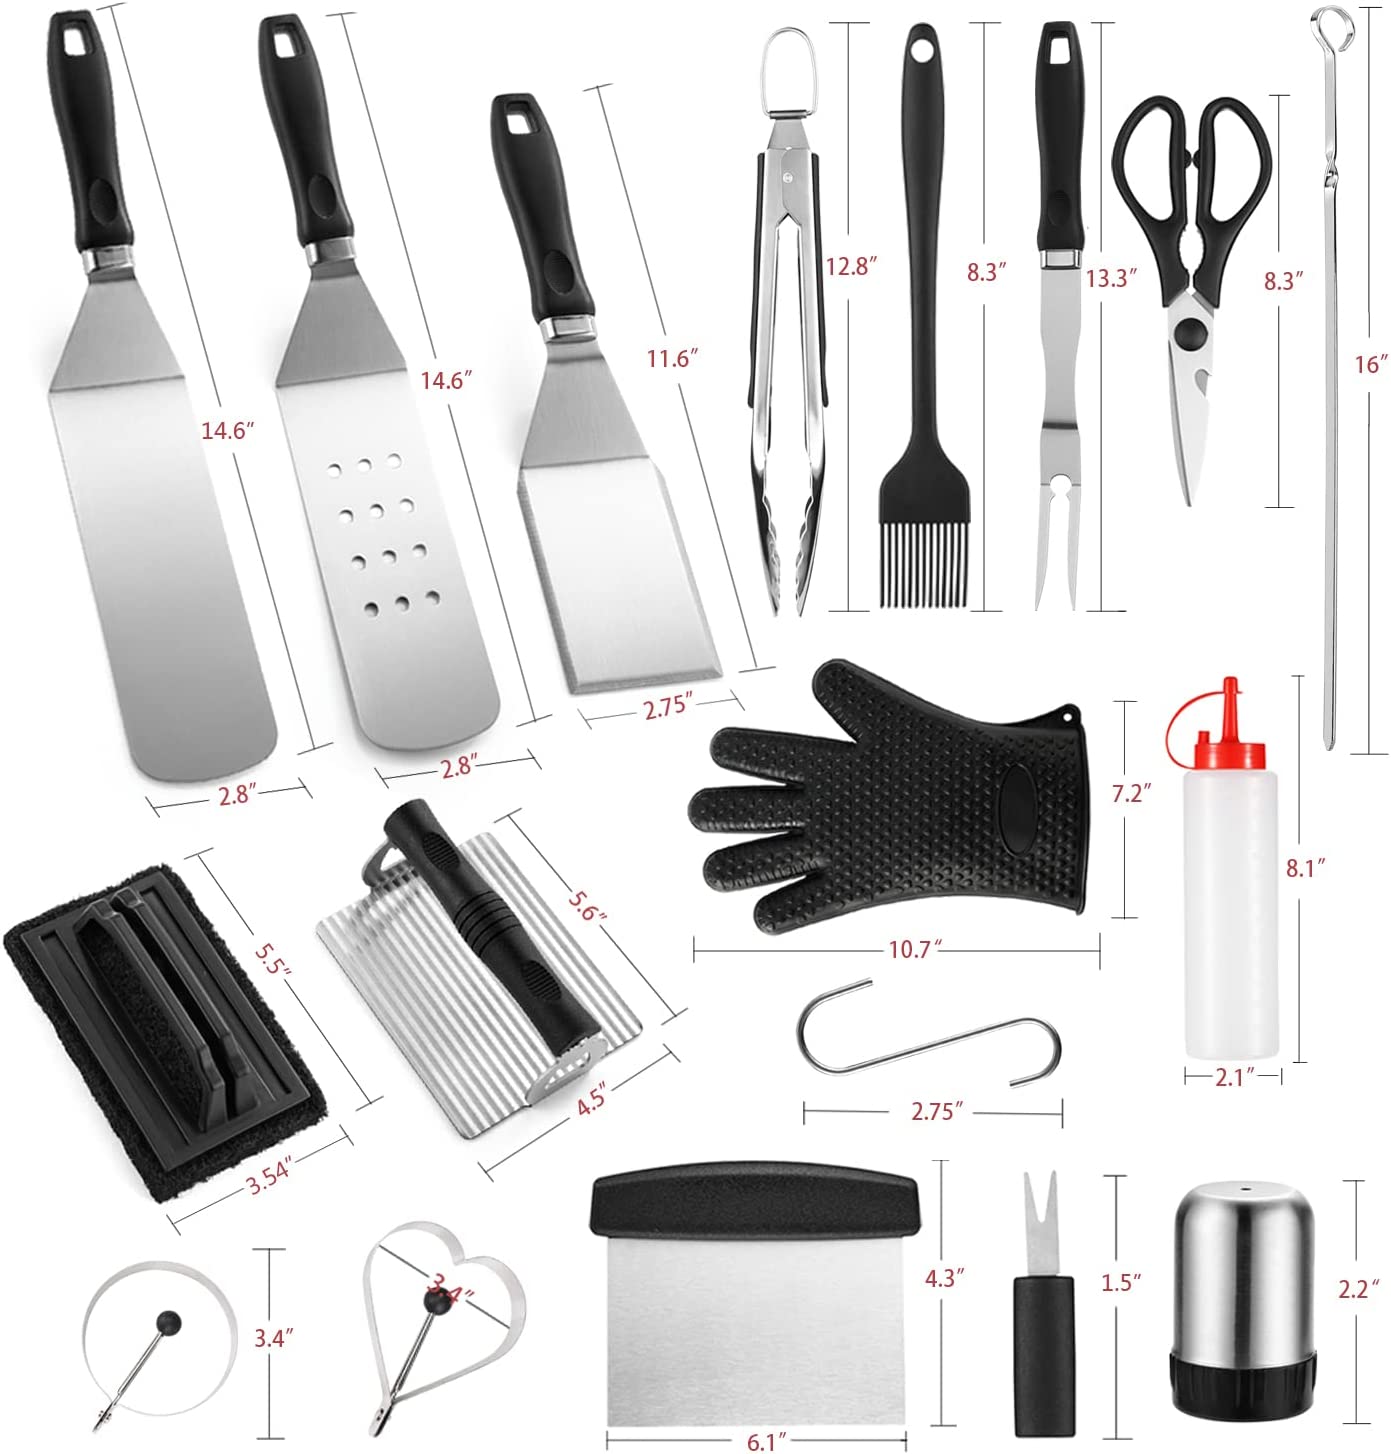 71Yae0Knv4L. AC SL1500  - Griddle Accessories Tool-40pcs Flat Top Griddle Set,Stainless Steel Griddle Utensils with Spatulas,Tongs,Fork,Glove,Burger Press,Cleaning Brush.